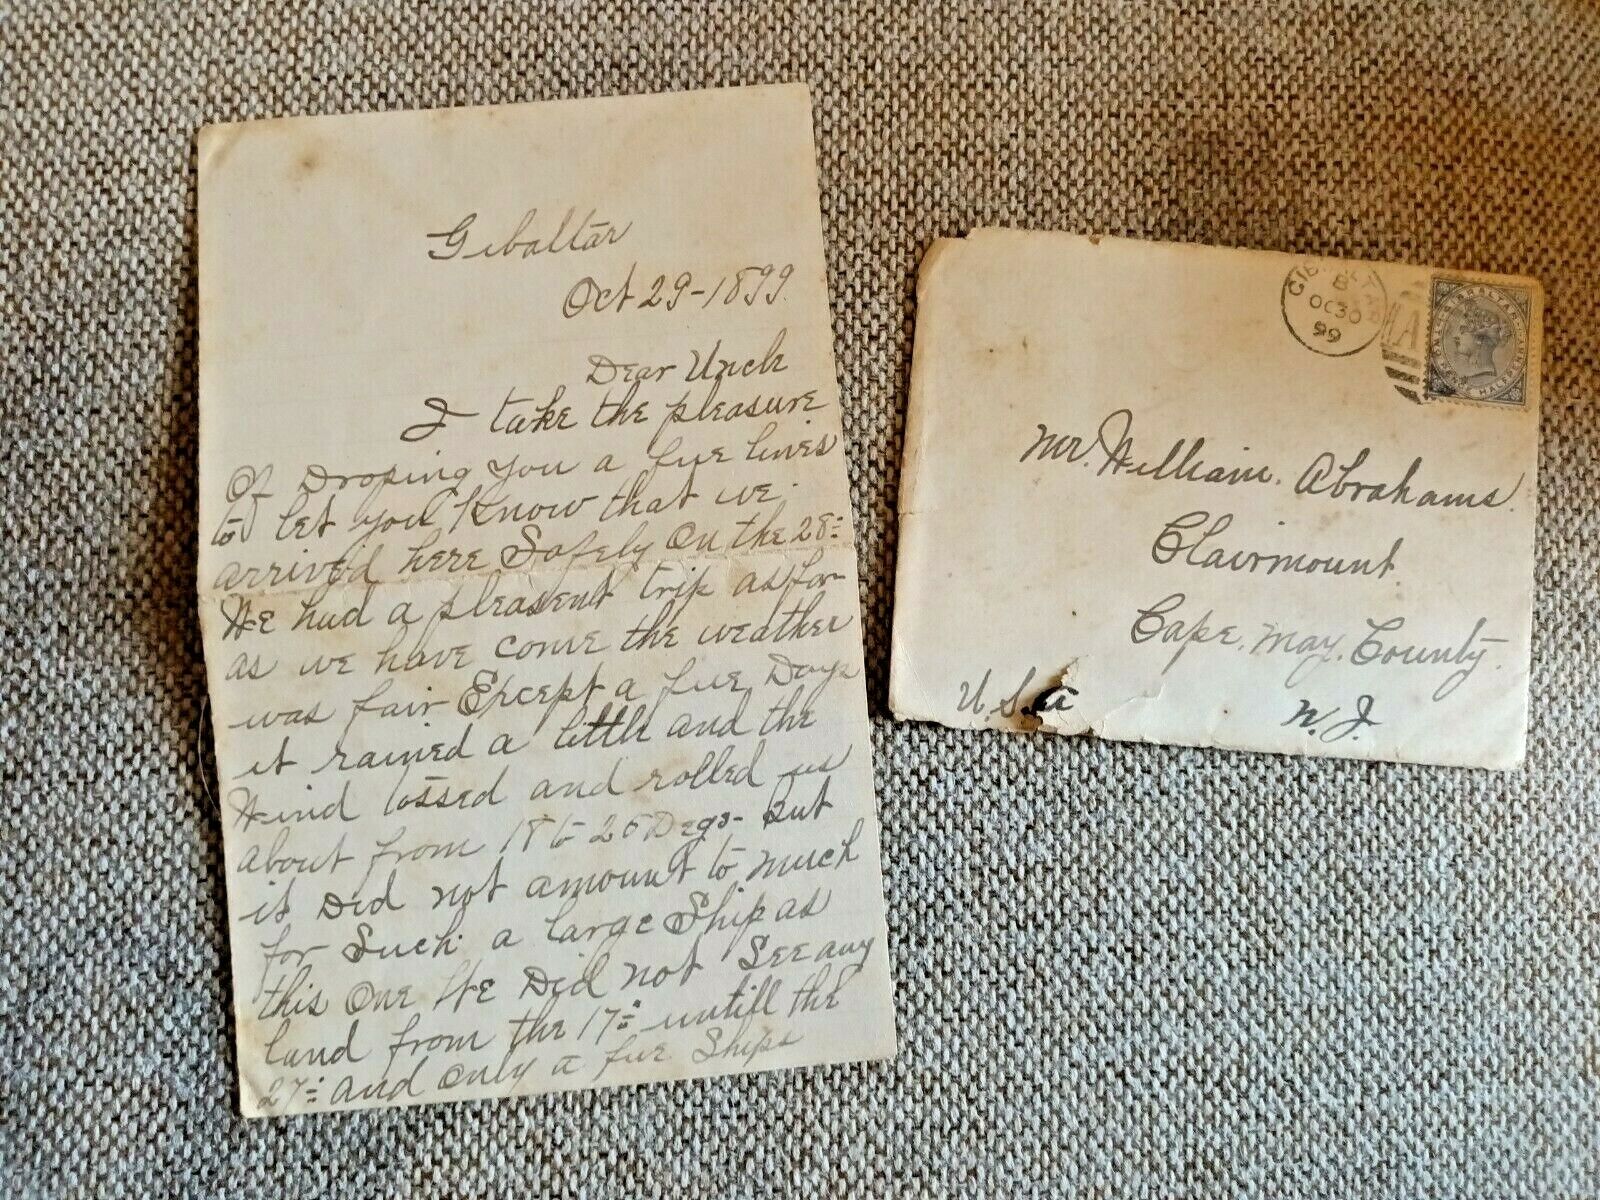 1899 HANDWRITTEN LETTER CLAIRMONT CAPE MAY NJ FROM SHIP USS BROOKLYN-NAVY